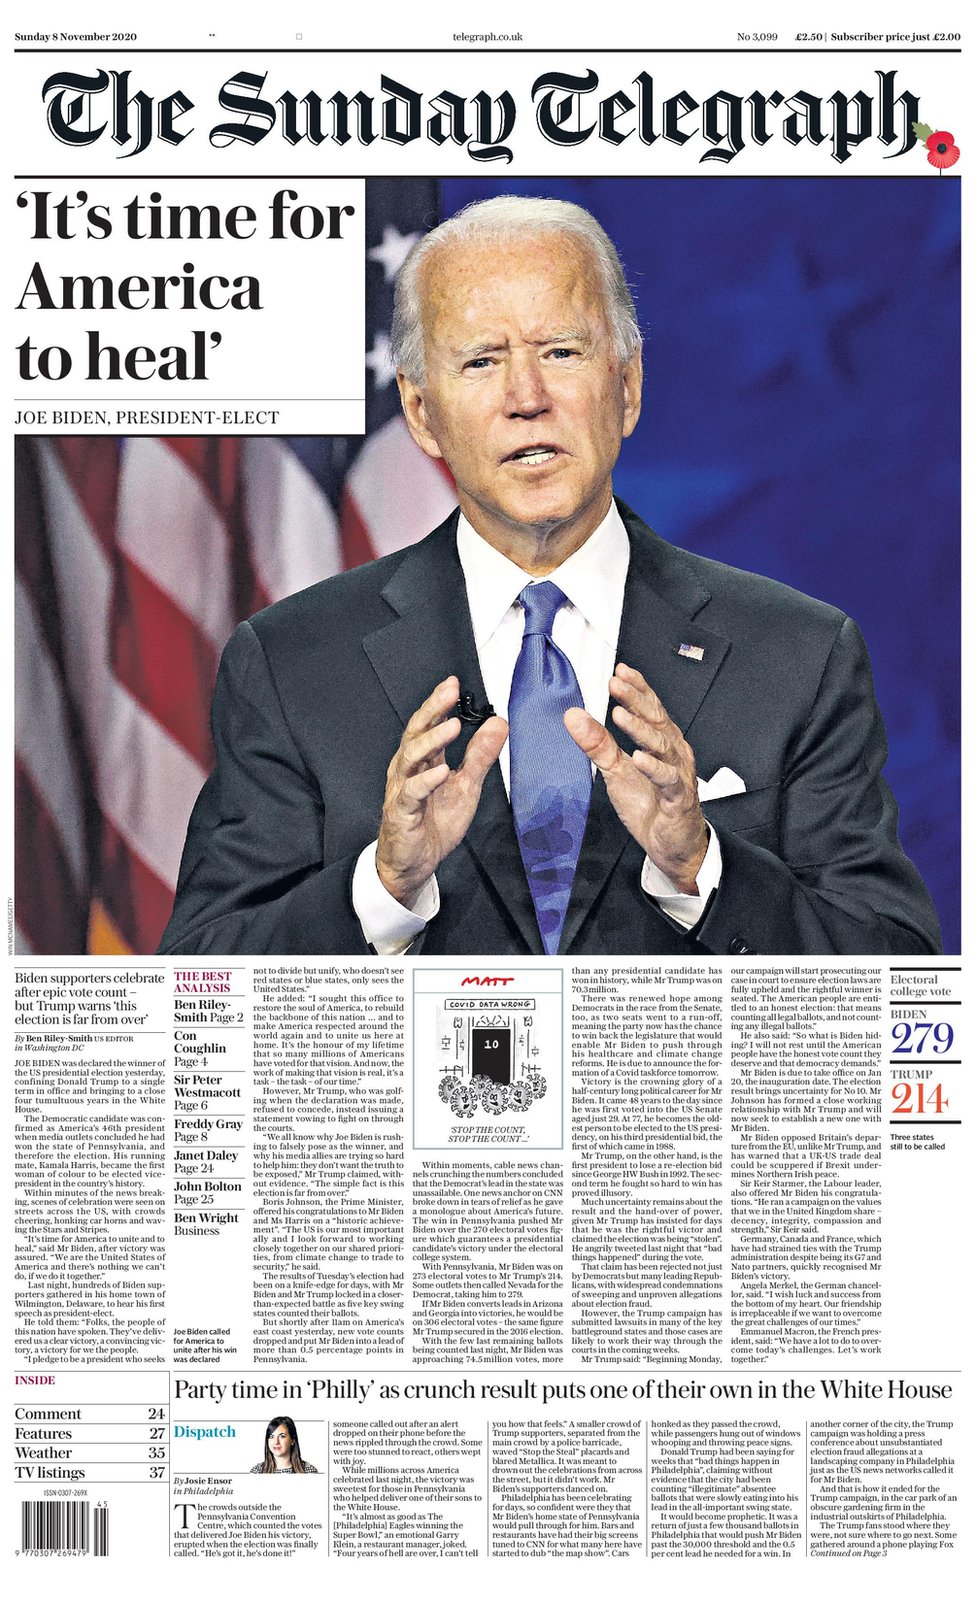 Scotland's papers: 'Trump dumped' as Biden vows to 'unite and heal ...